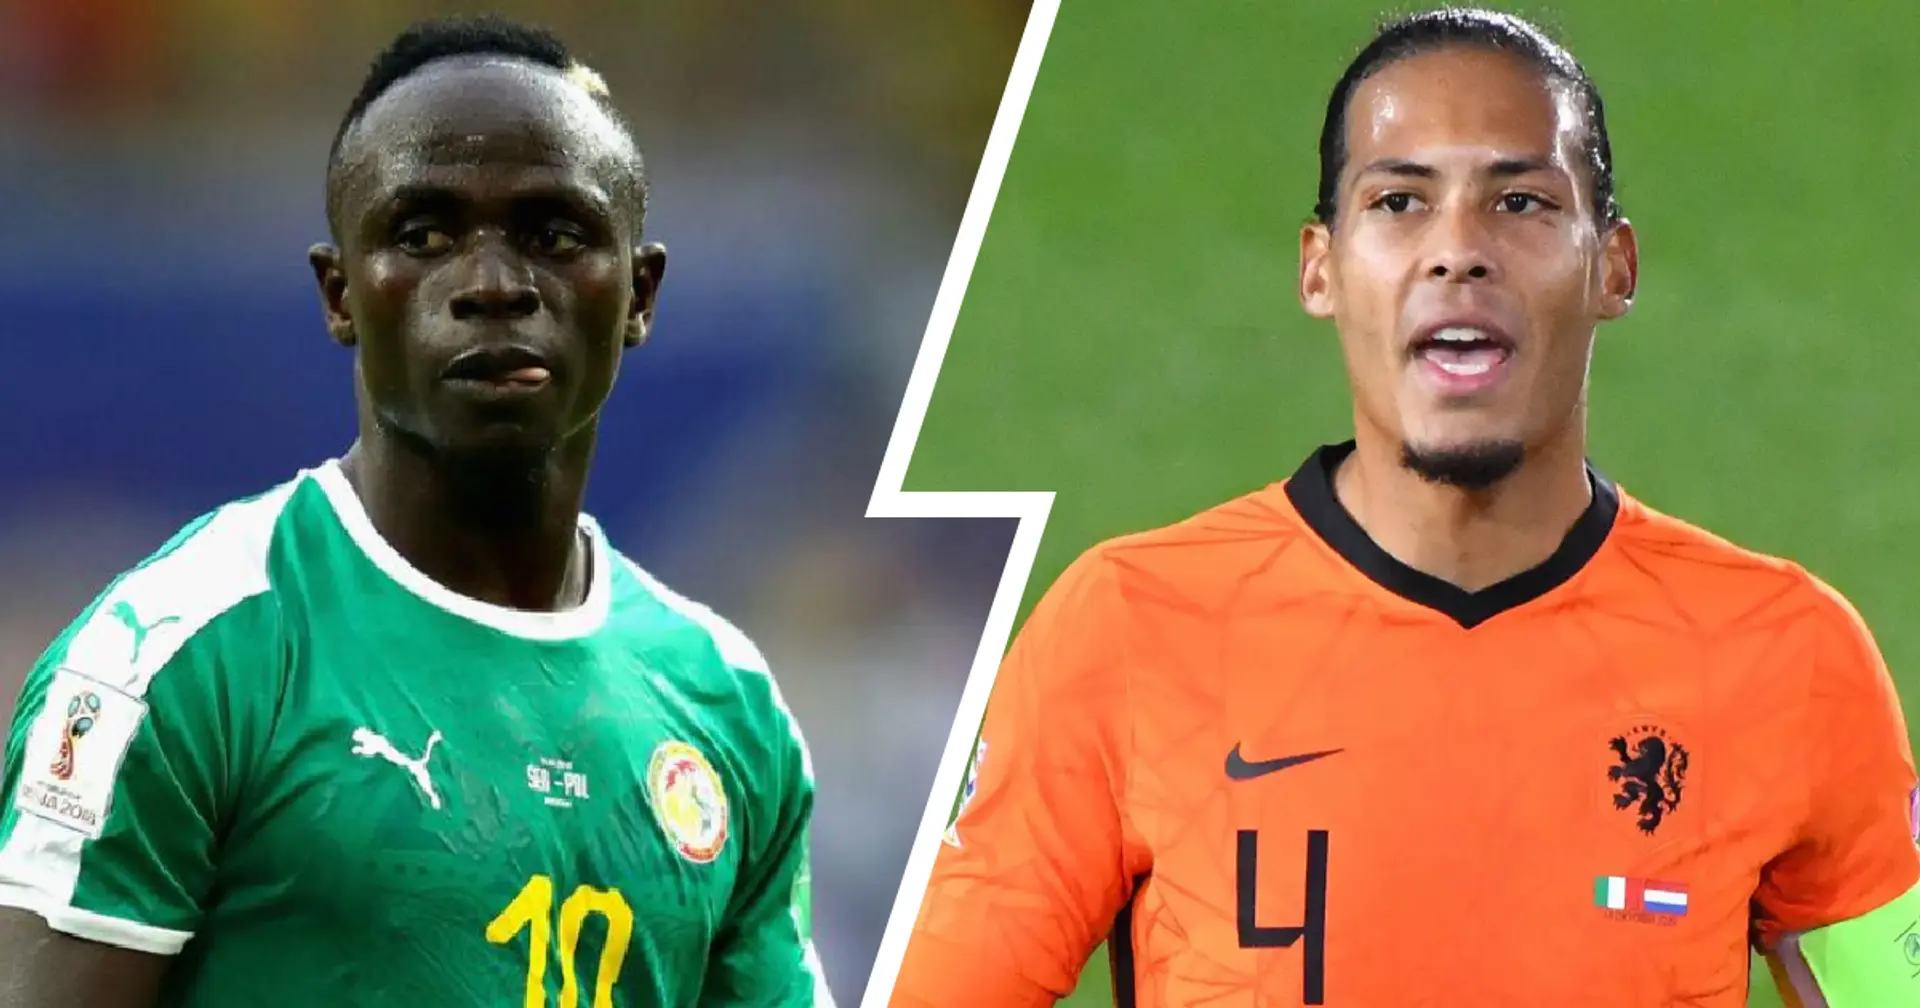 Mane to travel to World Cup contrary to previous reports, could face Van Dijk in group stage